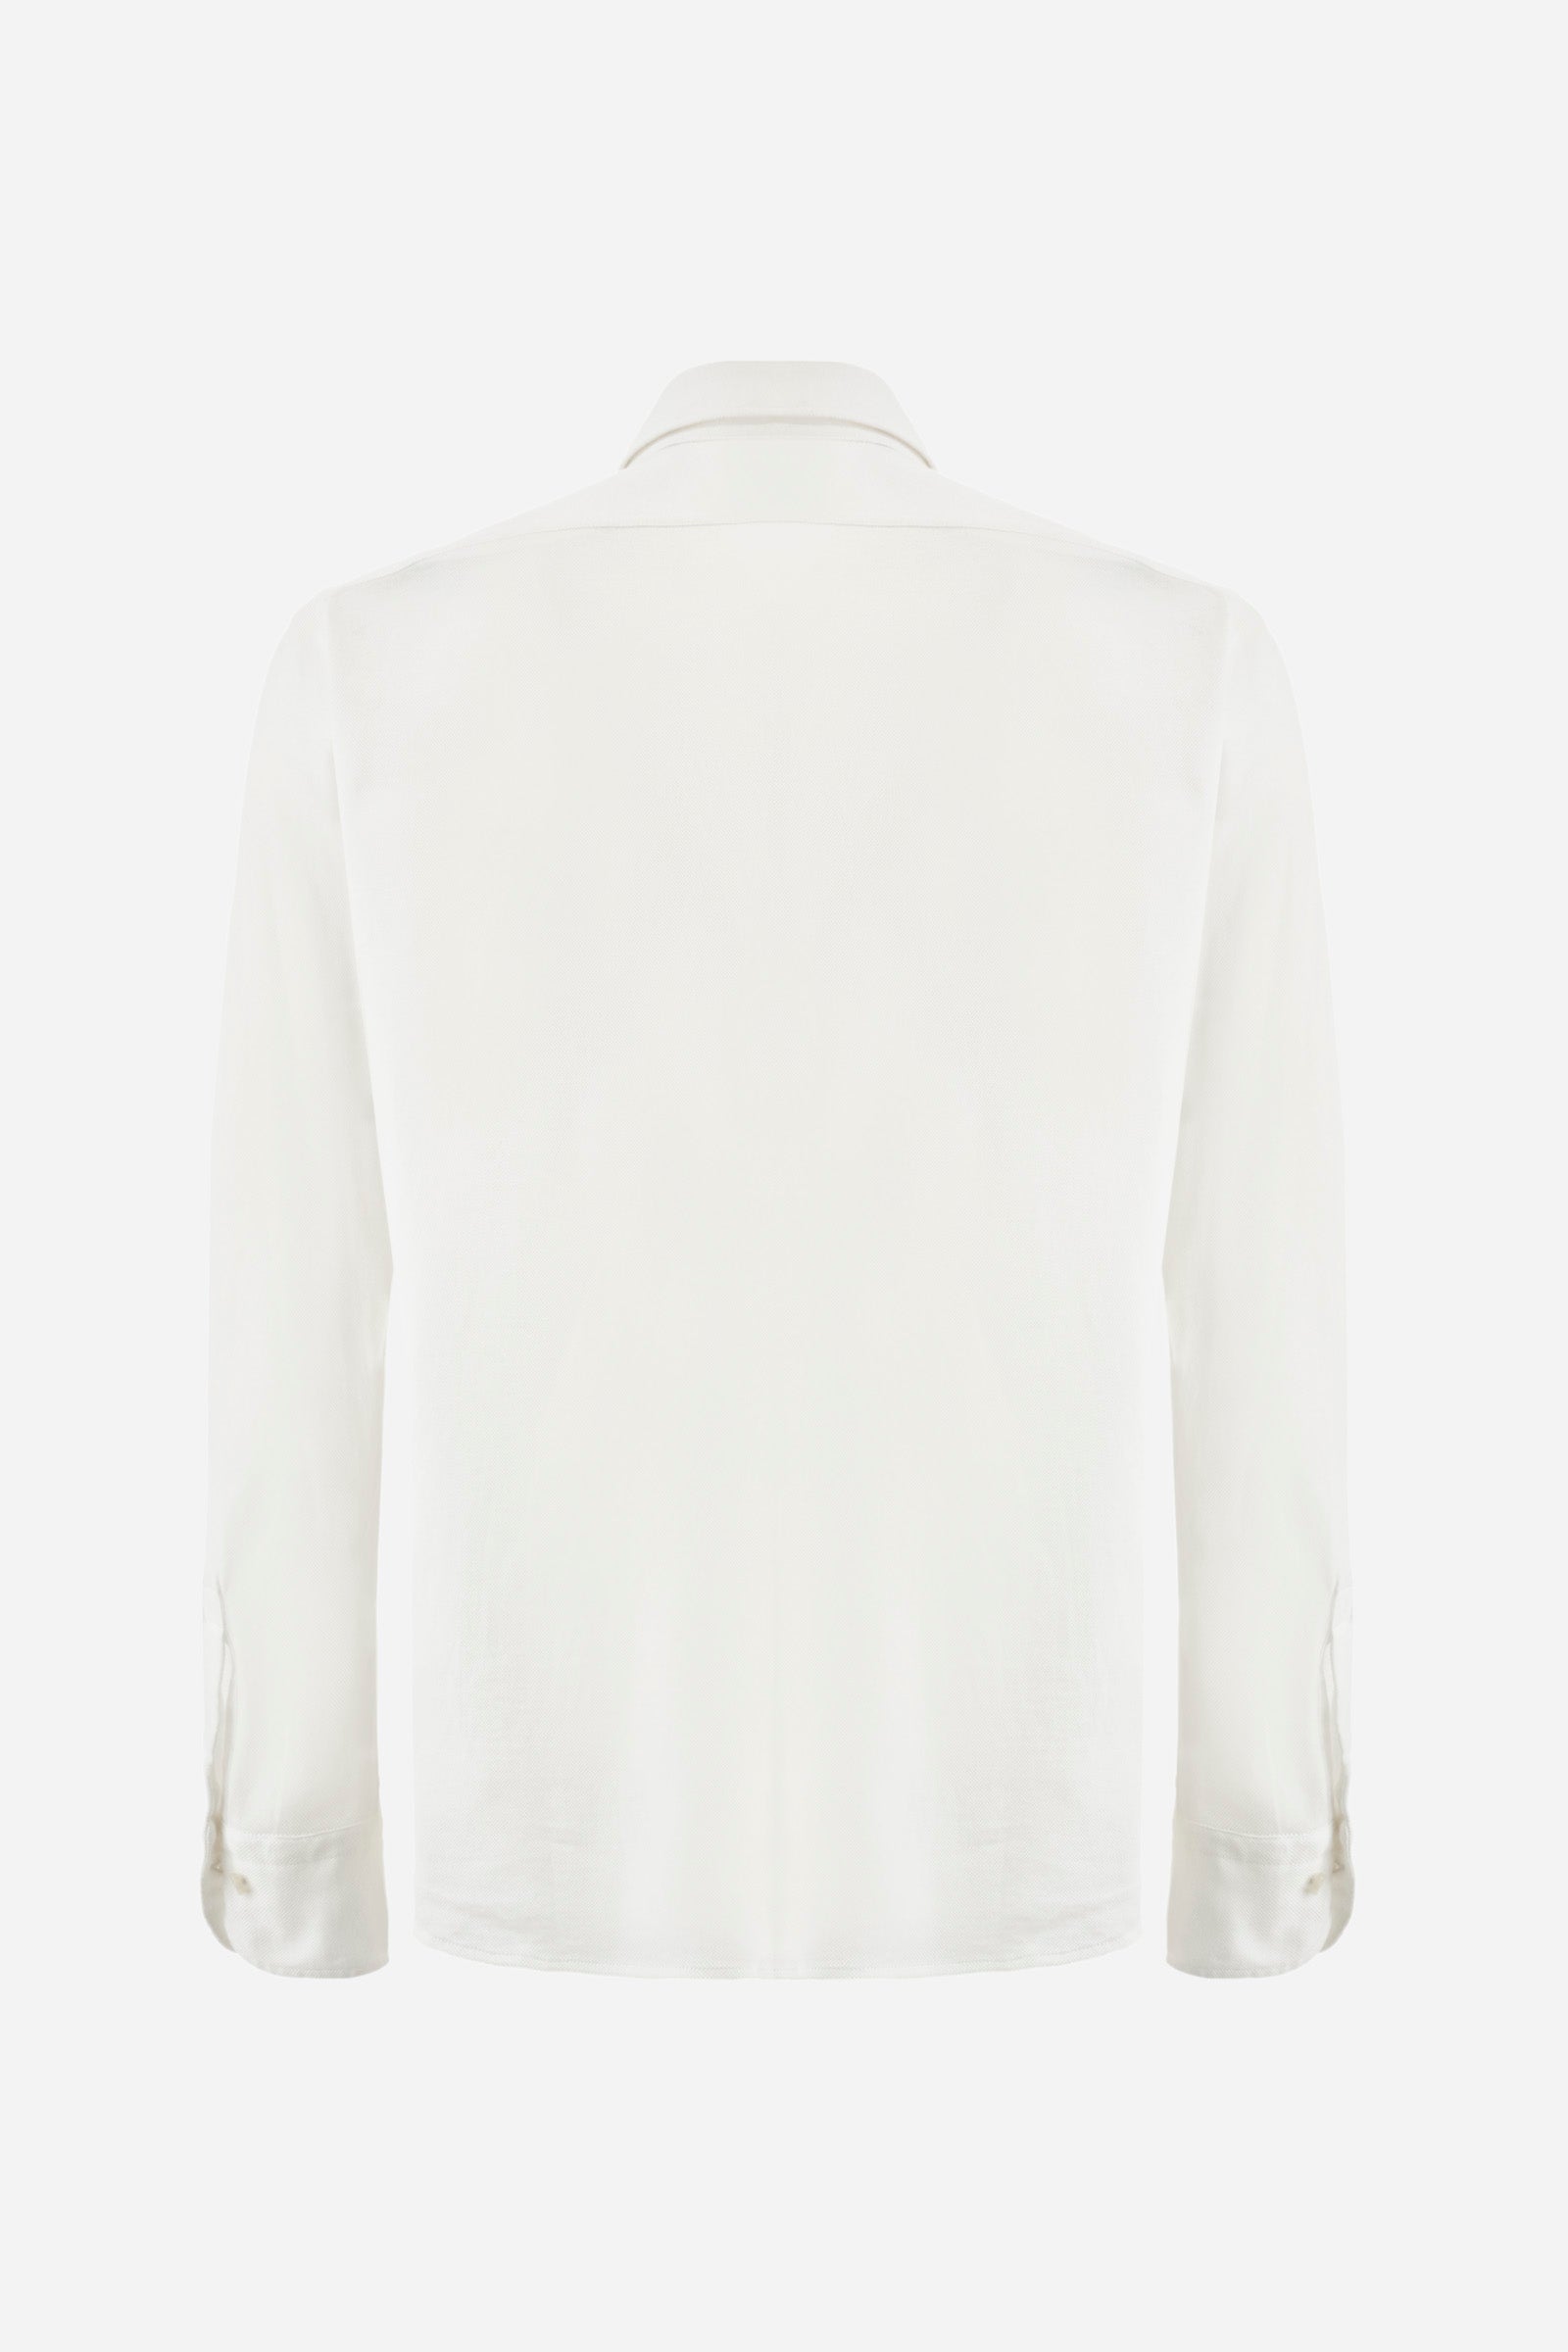 Long-sleeved shirt in cotton piqué, fitted cut for men - Qalam